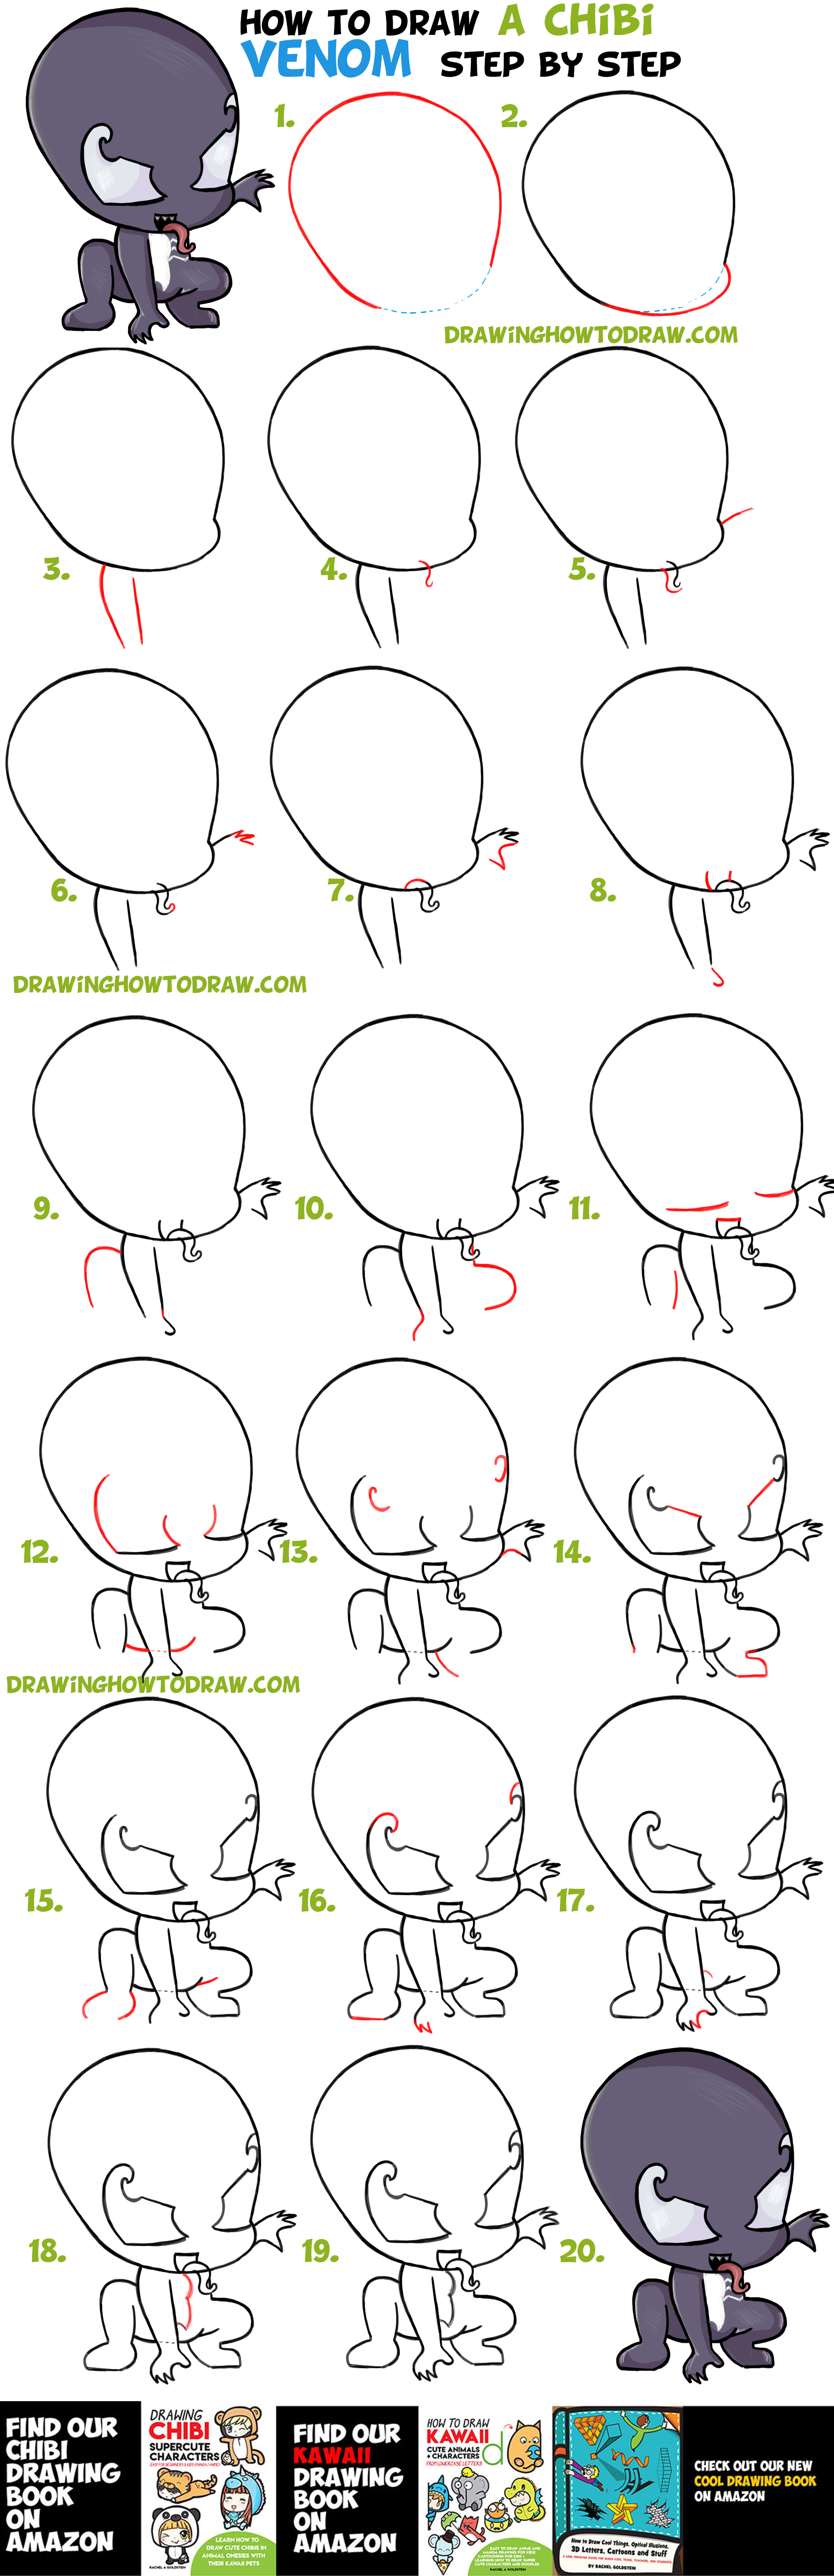 How To Draw Chibi Cute Venom From Marvel Spiderman Easy Step By Step Drawing Tutorial For Kids Beginners How To Draw Step By Step Drawing Tutorials